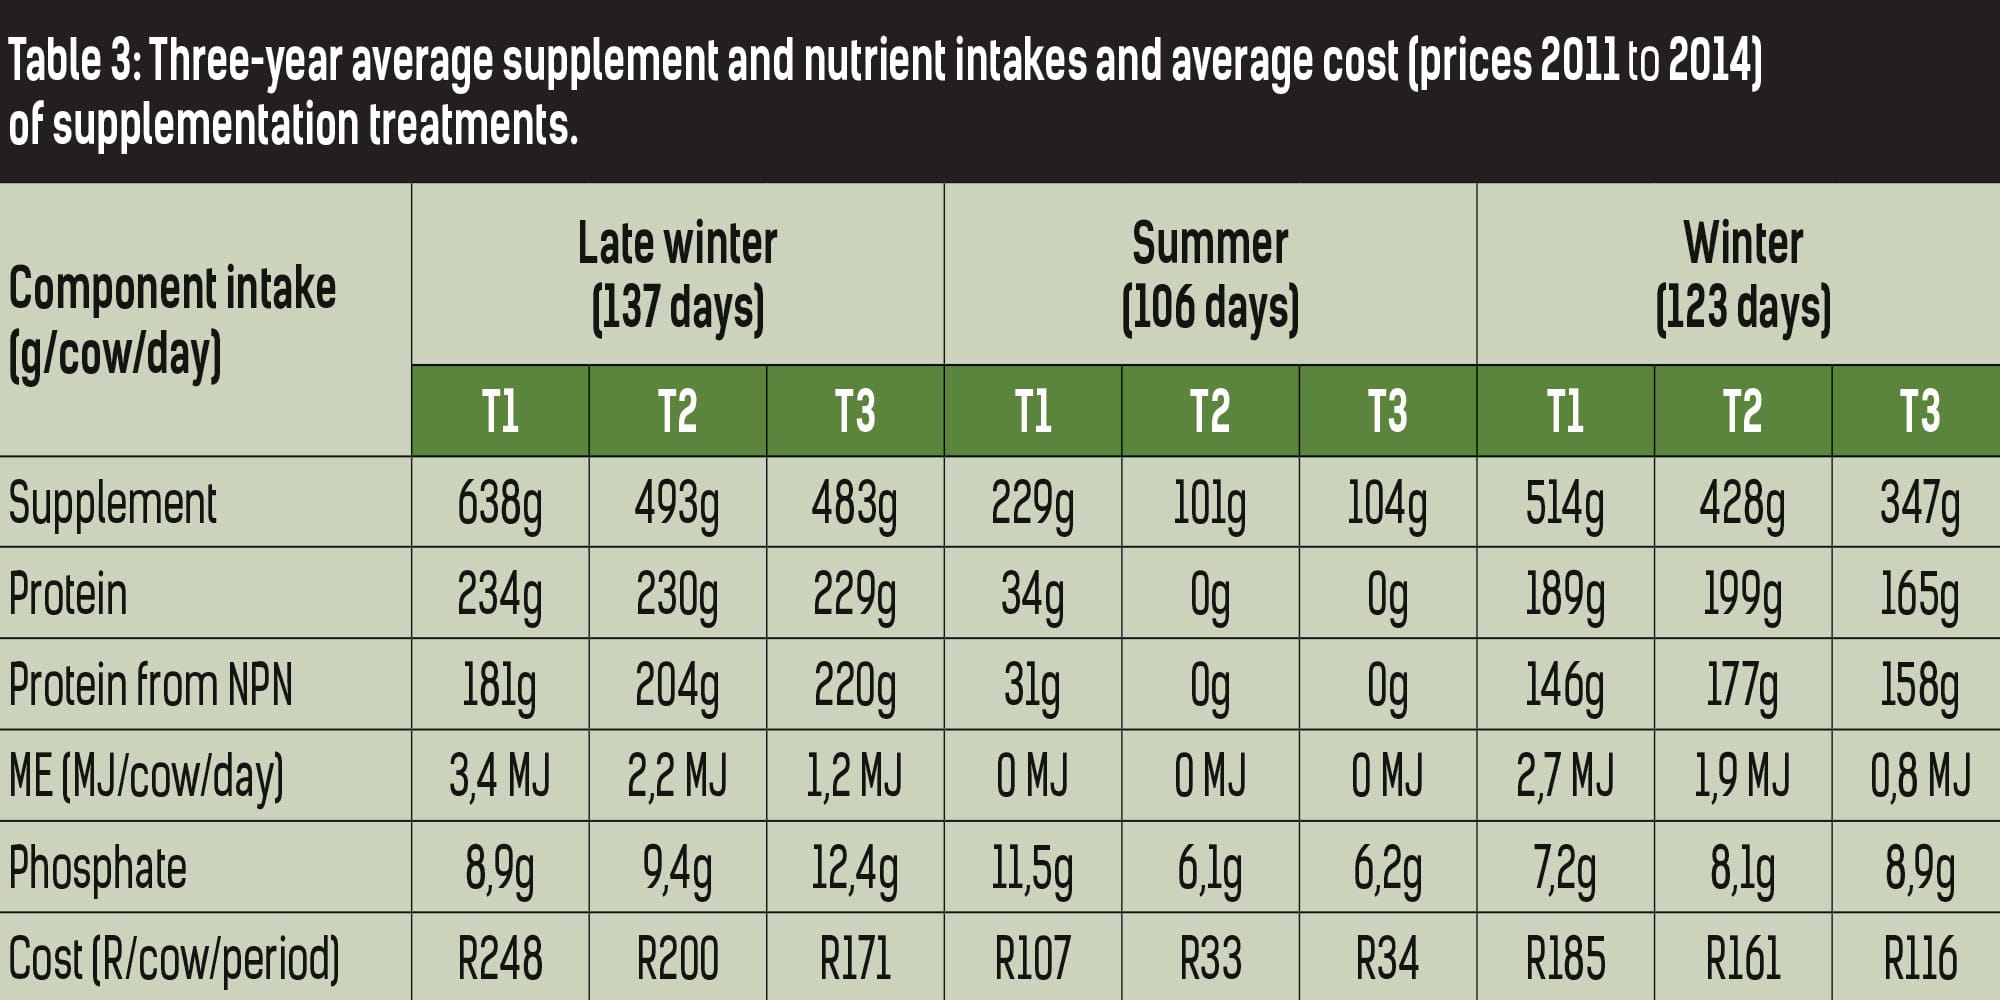 Table 3: Three-year average supplement and nutrient intakes and average cost (prices 2011 to 2014) of supplementation treatments.